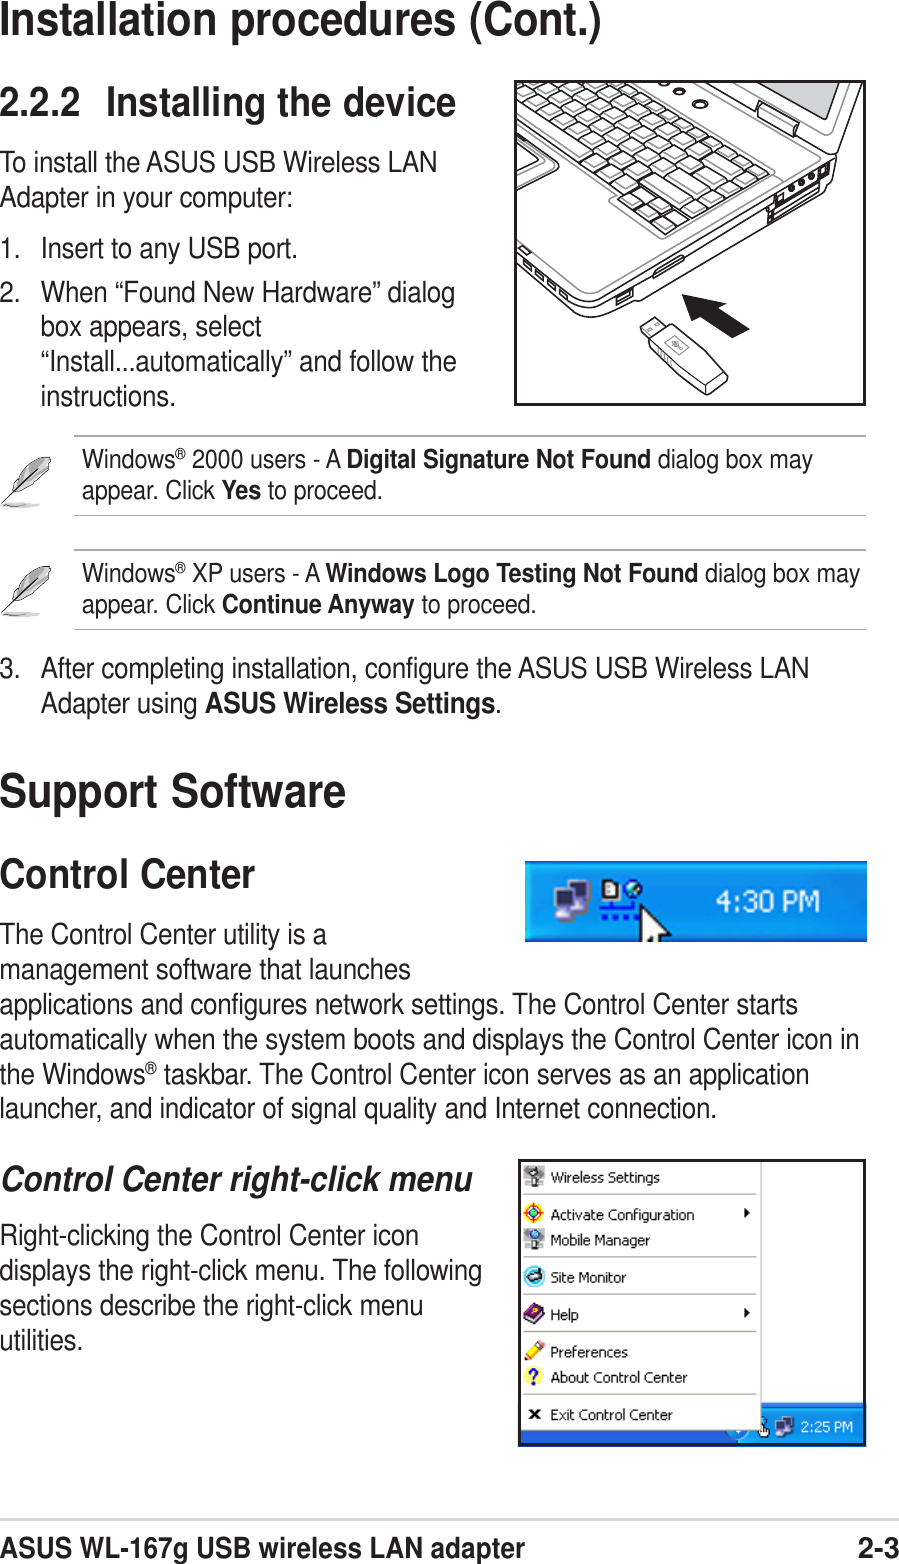 ASUS WL-167g USB wireless LAN adapter2-3Installation procedures (Cont.)2.2.2 Installing the deviceTo install the ASUS USB Wireless LANAdapter in your computer:1. Insert to any USB port.2. When “Found New Hardware” dialogbox appears, select“Install...automatically” and follow theinstructions.Windows® 2000 users - A Digital Signature Not Found dialog box mayappear. Click Yes to proceed.Windows® XP users - A Windows Logo Testing Not Found dialog box mayappear. Click Continue Anyway to proceed.3. After completing installation, configure the ASUS USB Wireless LANAdapter using ASUS Wireless Settings.Support SoftwareControl CenterThe Control Center utility is amanagement software that launchesapplications and configures network settings. The Control Center startsautomatically when the system boots and displays the Control Center icon inthe Windows® taskbar. The Control Center icon serves as an applicationlauncher, and indicator of signal quality and Internet connection.Control Center right-click menuRight-clicking the Control Center icondisplays the right-click menu. The followingsections describe the right-click menuutilities.